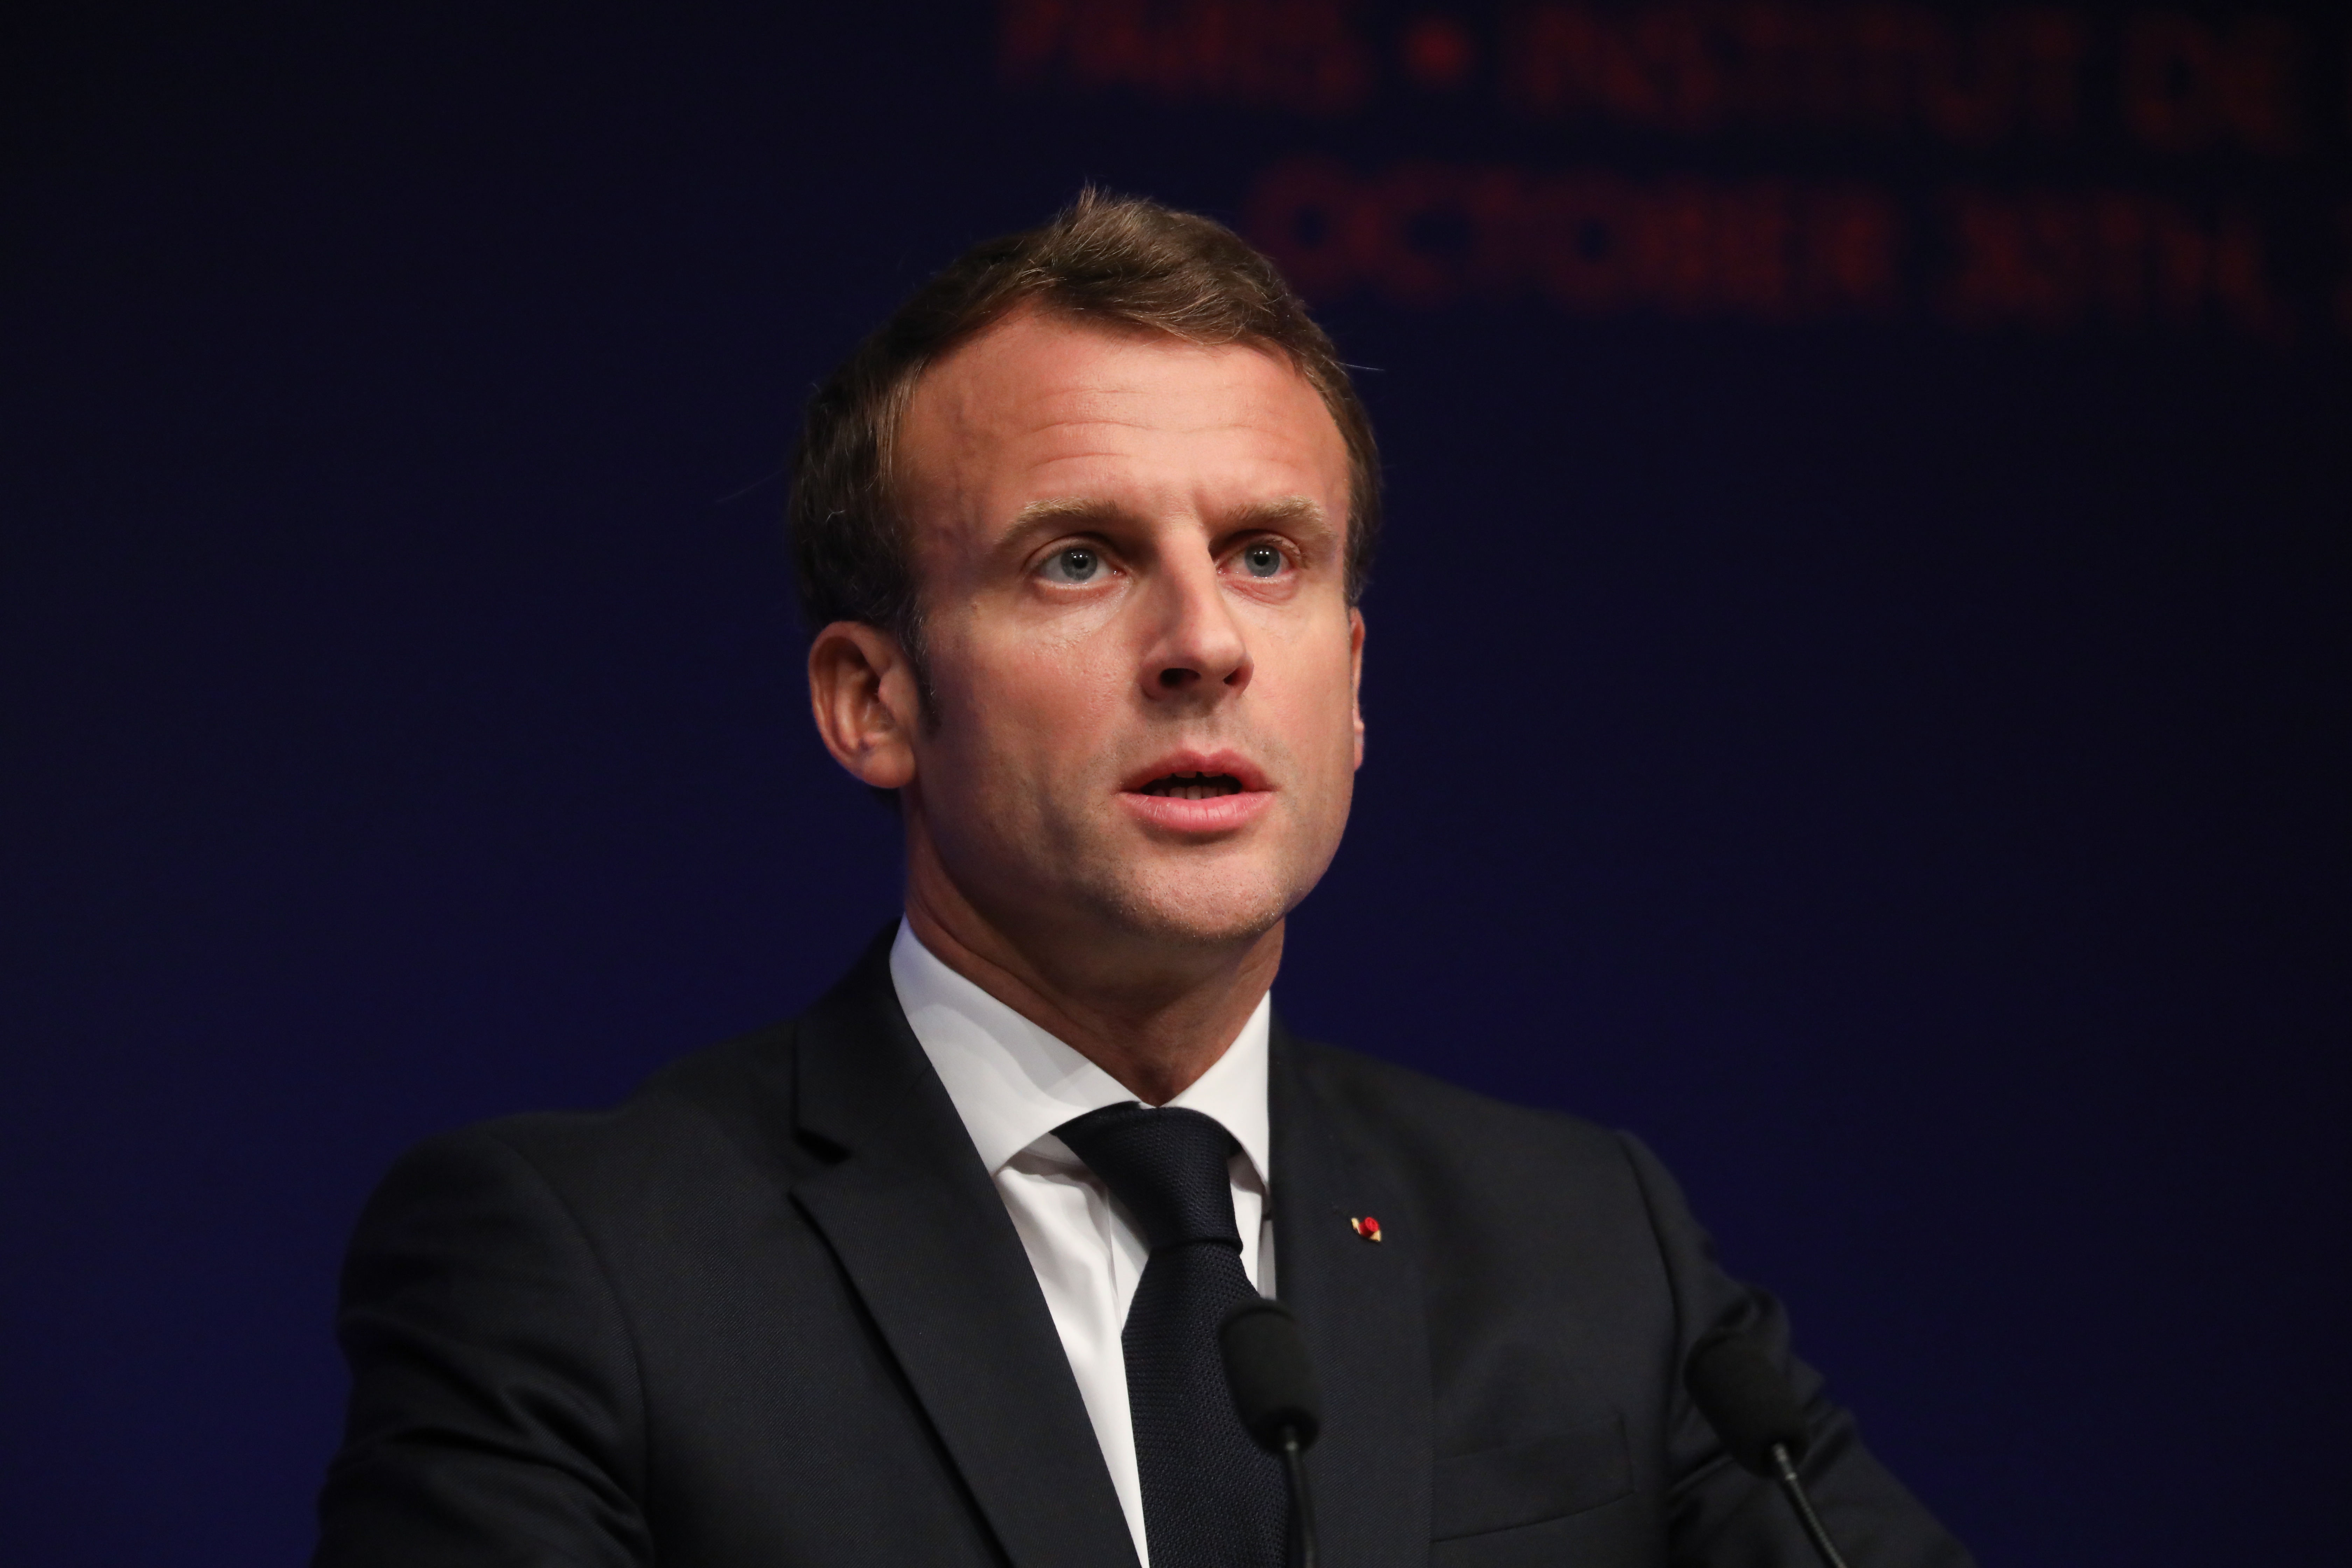 epa07960102 French President Emmanuel Macron delivers a speech during the Global Forum on Artificial Intelligence (AI) for Humanity (GFAIH) at the Institut de France in Paris, France, 30 October 2019.  EPA/LUDOVIC MARIN / POOL  MAXPPP OUT